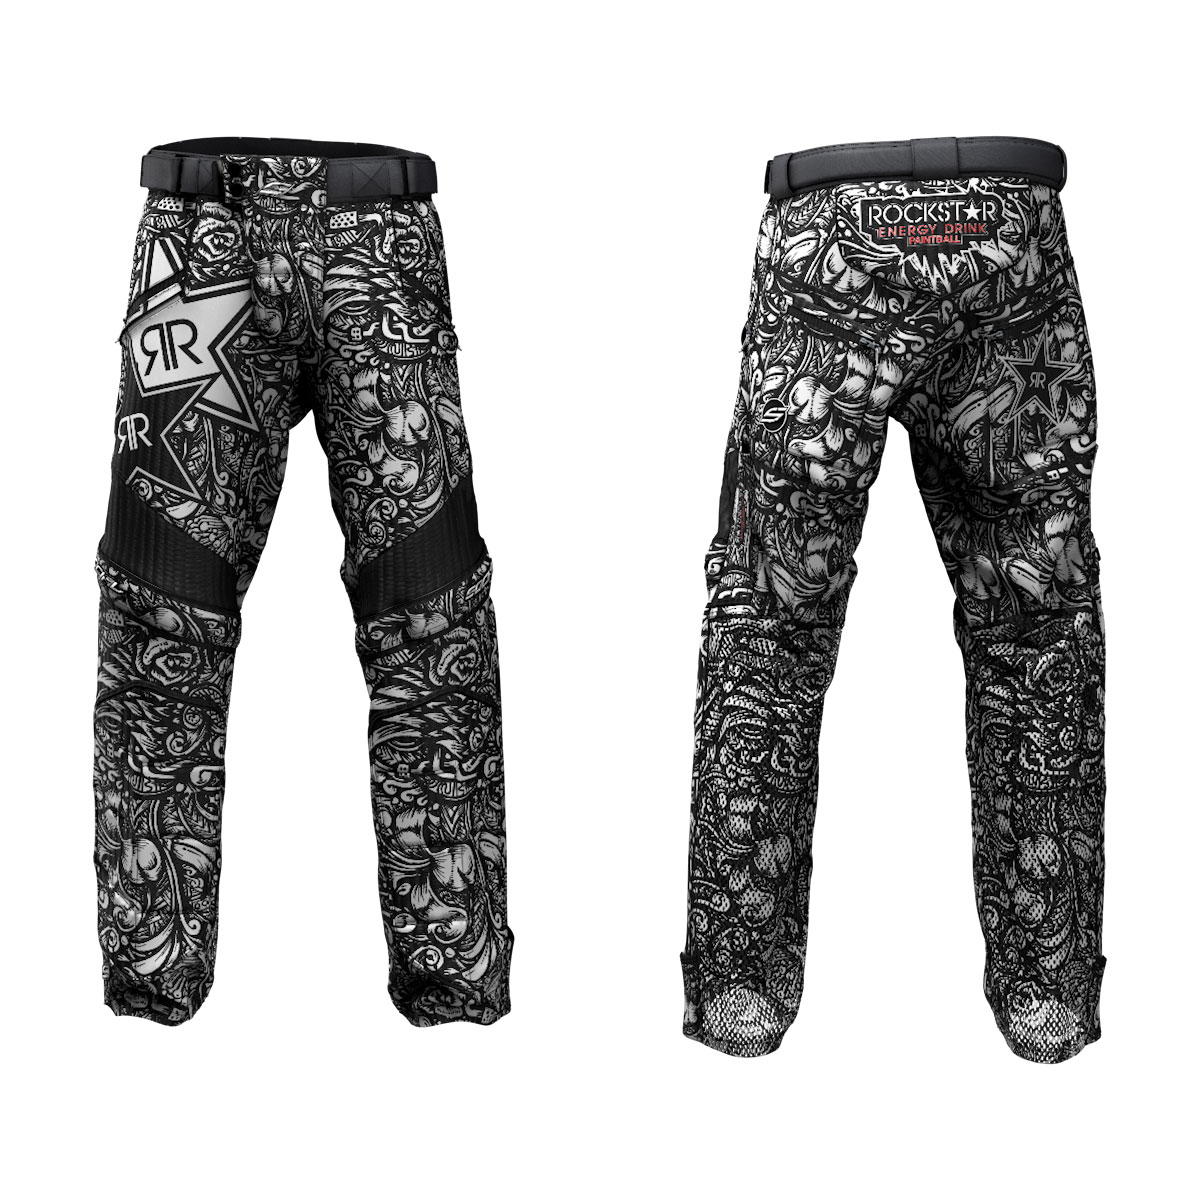 Rockstar joggers, Collection 2023